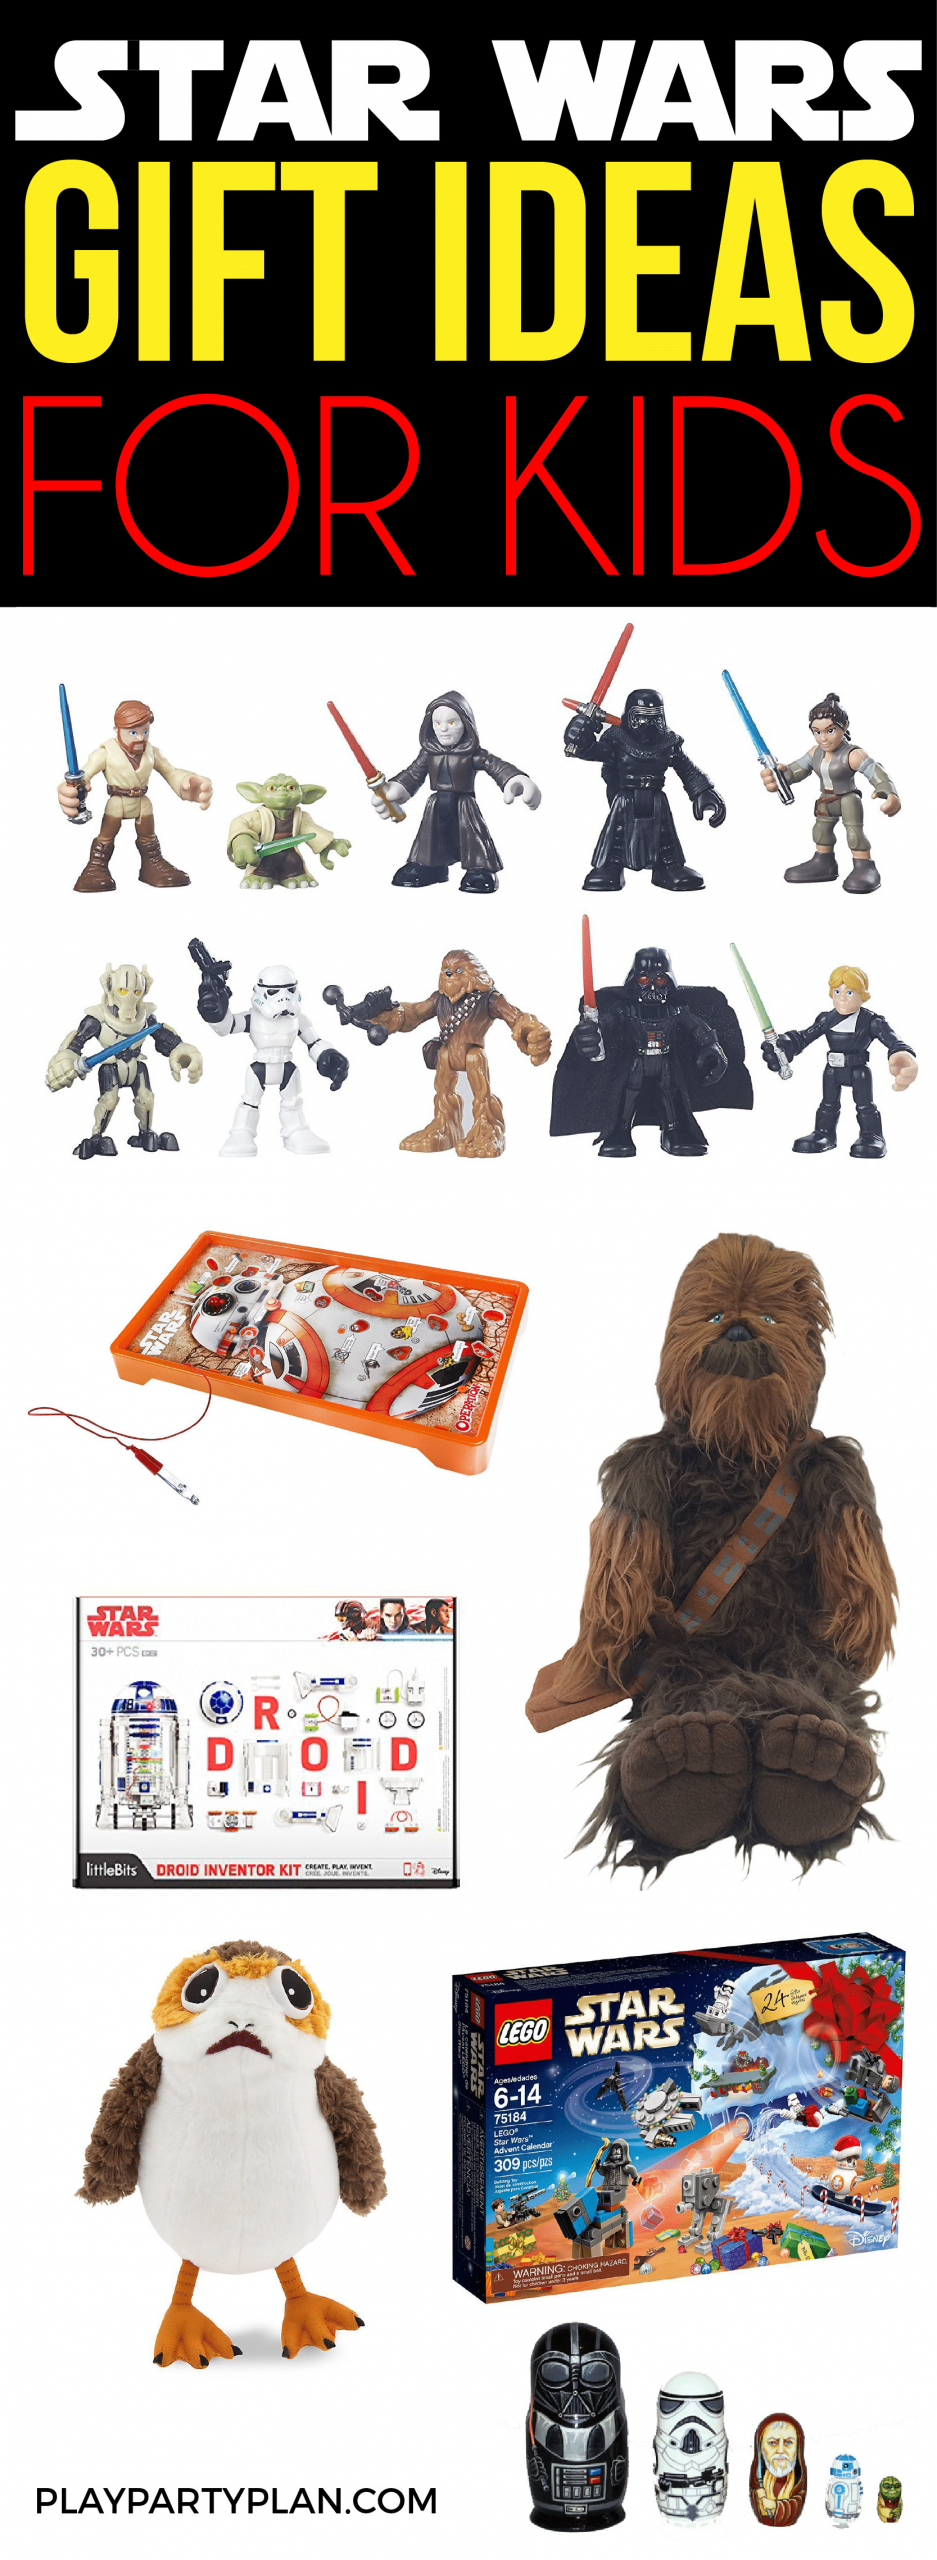 Best Star Wars Gifts For Kids
 24 Star Wars Gifts that Every Star Wars Fan Wants This Year